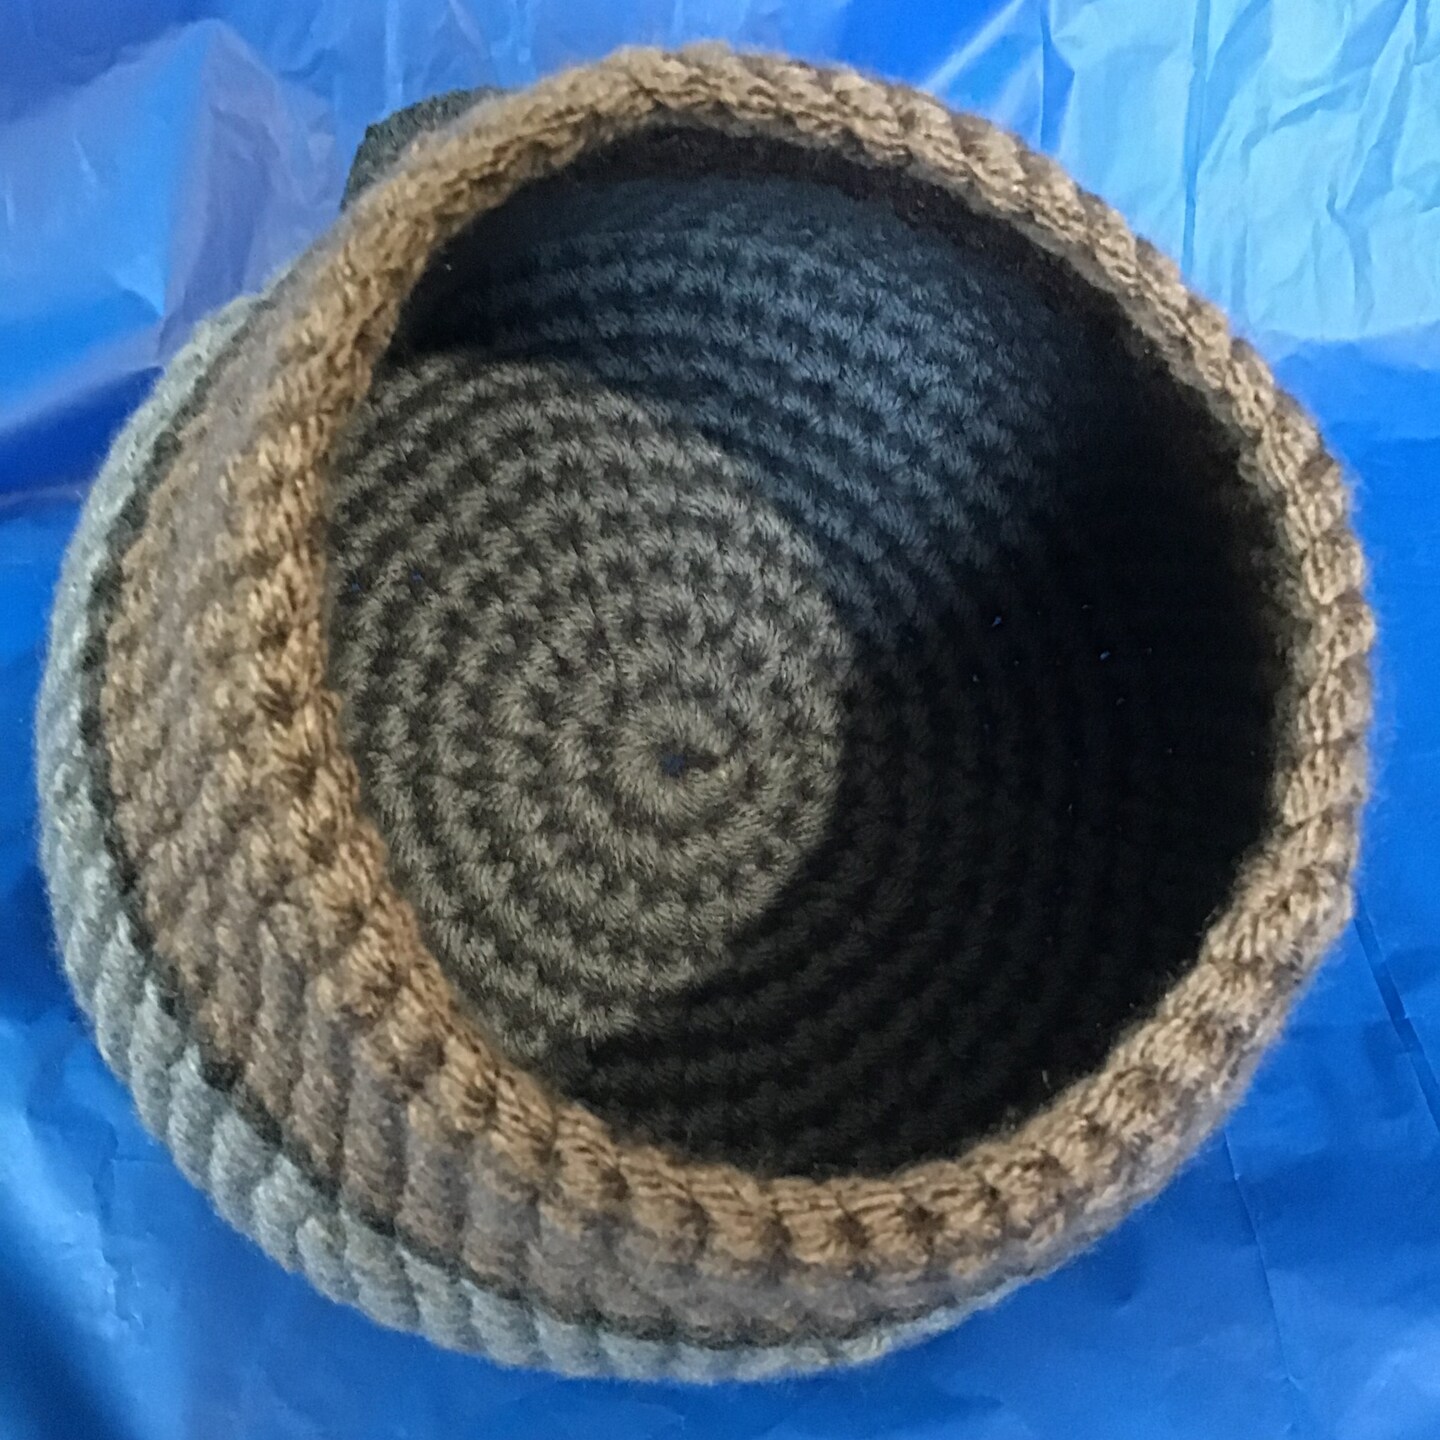 The Temple Crochet Bowl With Crochet Lid